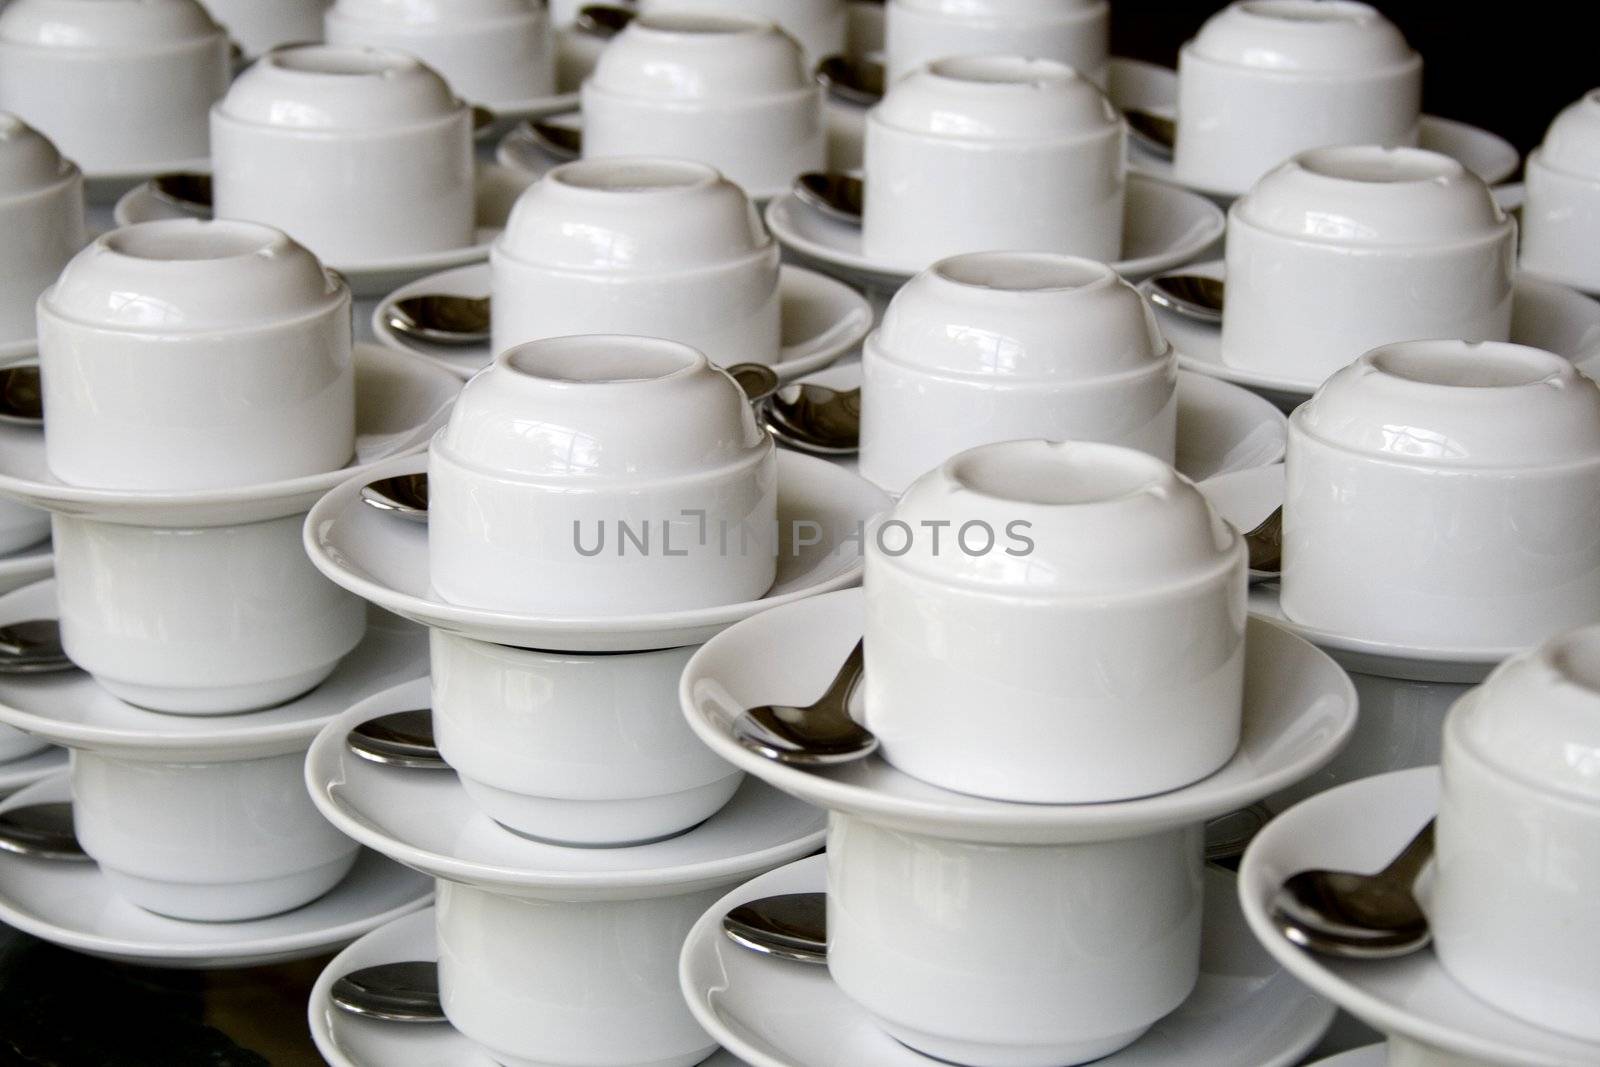 Image of a stack of cups and saucers.